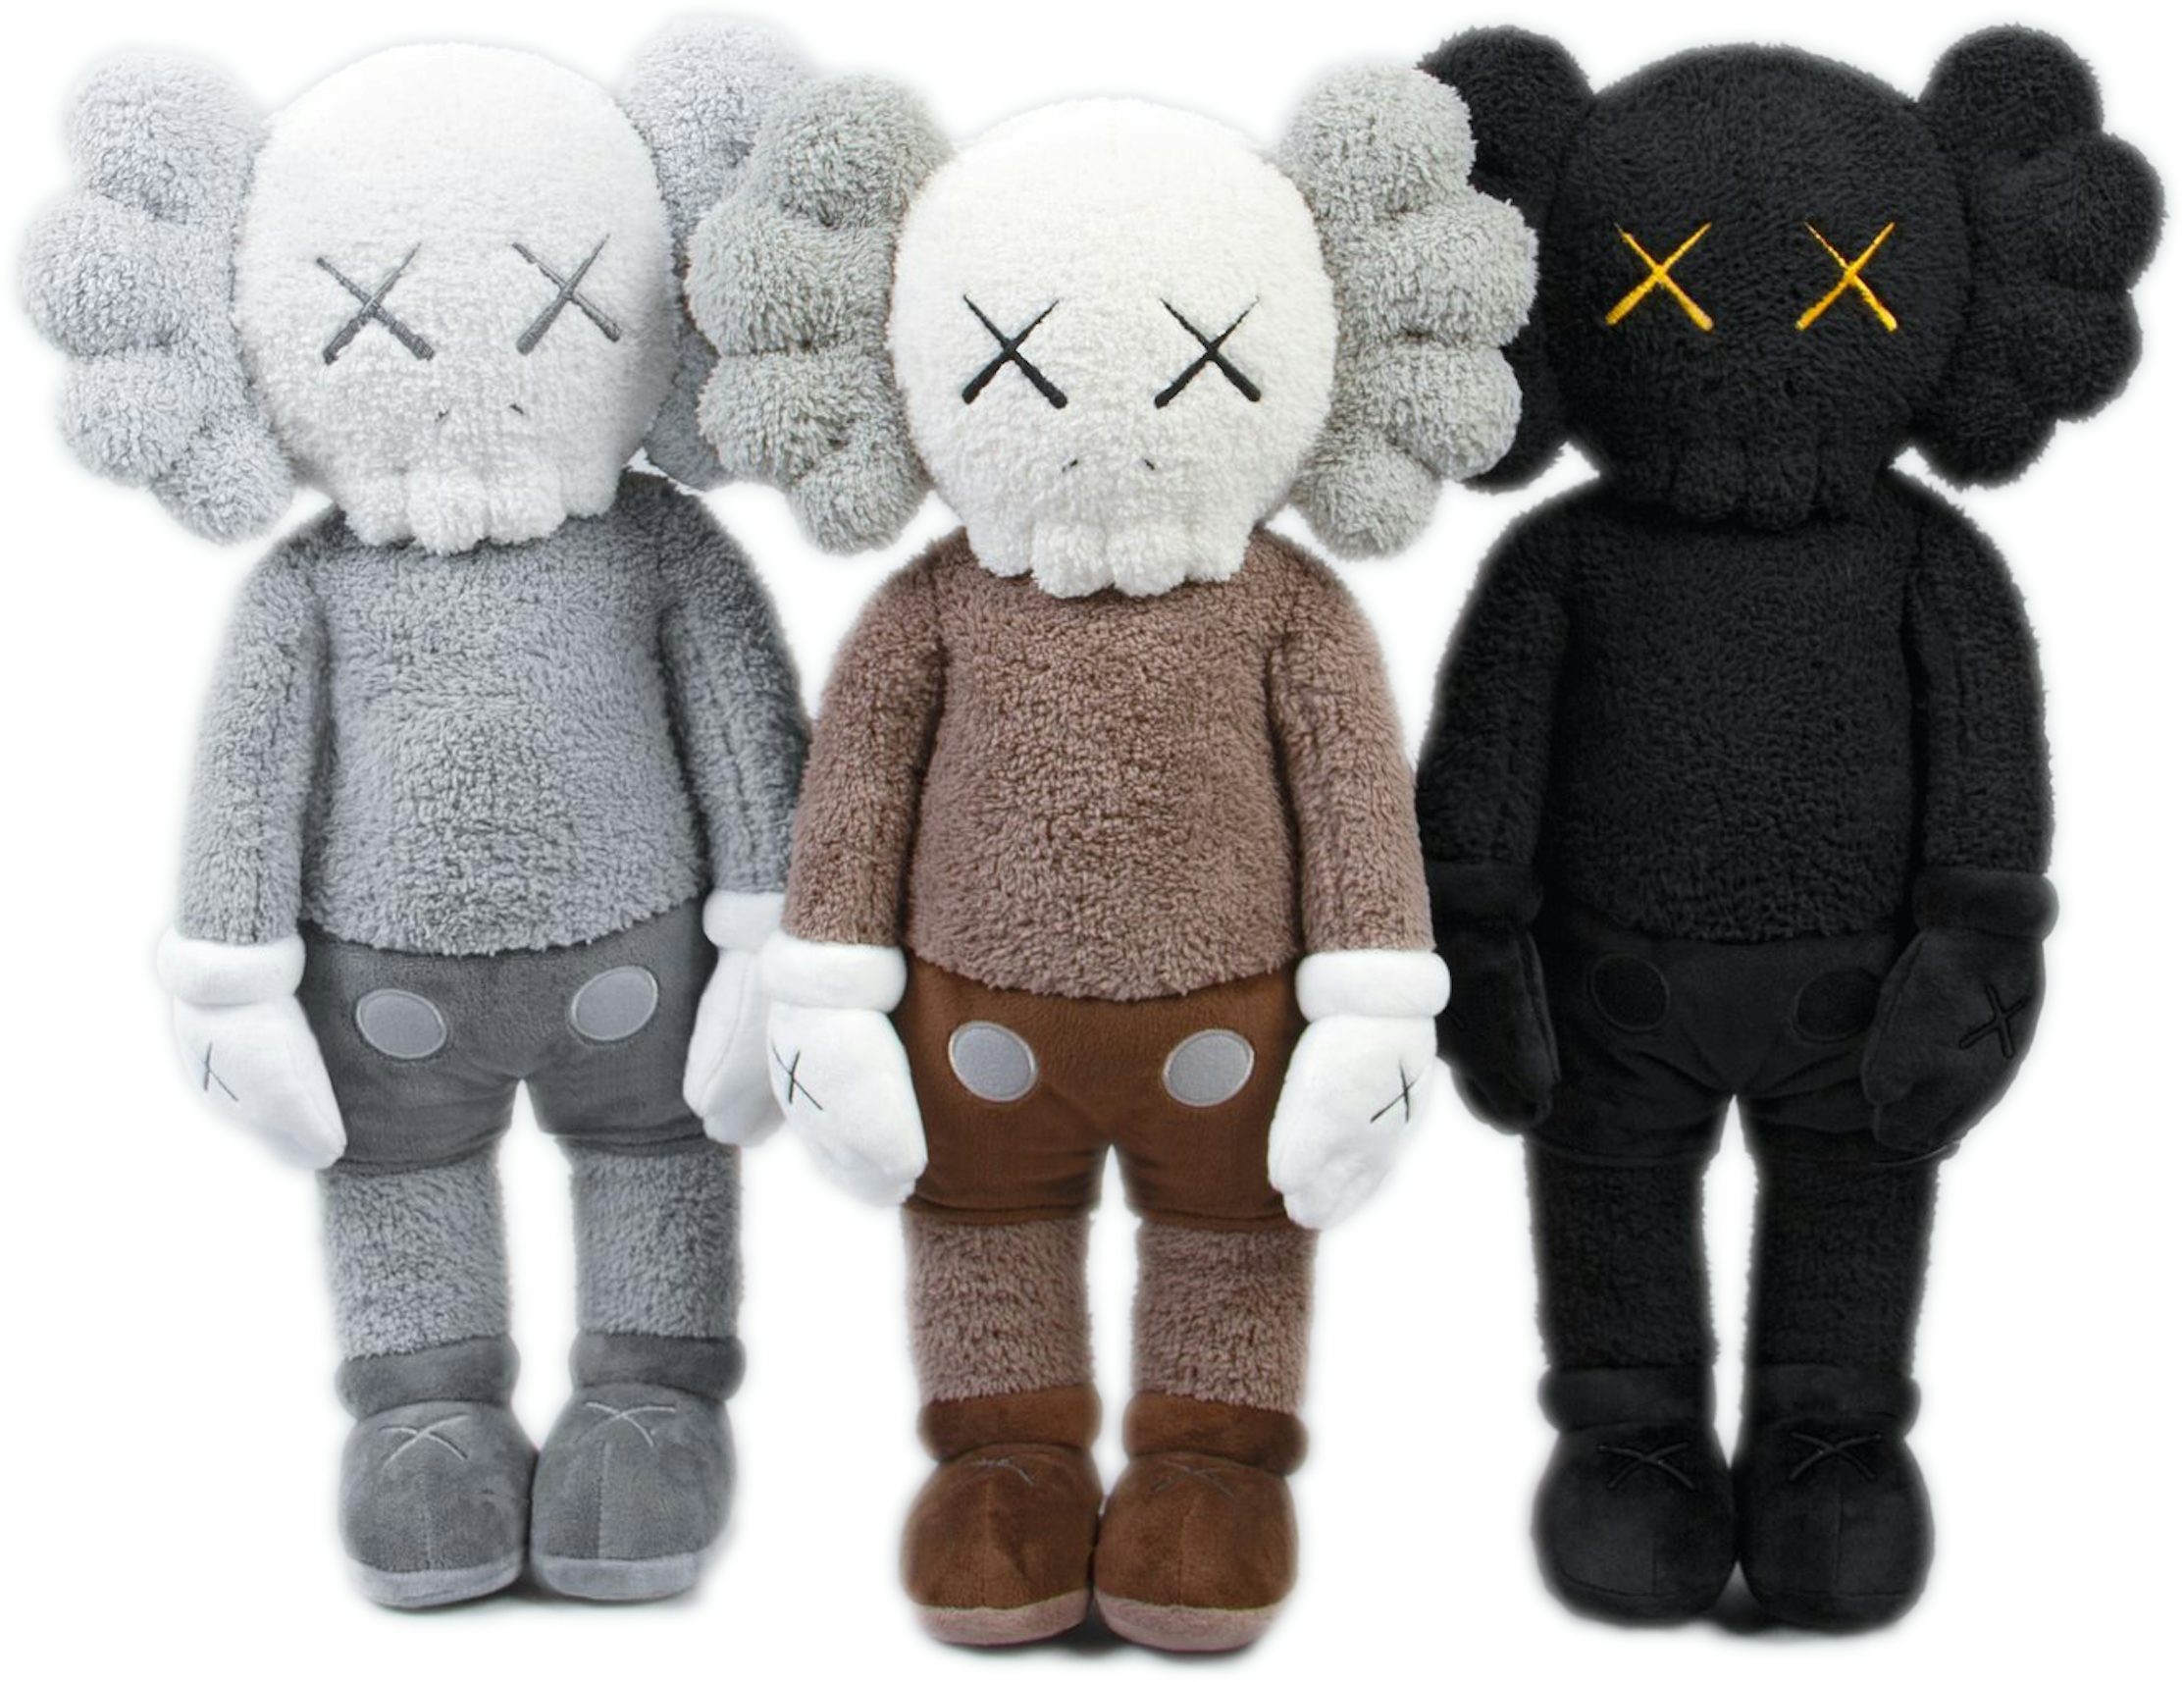 https://images.stockx.com/images/KAWS-HOLIDAY-Hong-Kong-Limited-20-Plush-Set-Multi.png?fit=fill&bg=FFFFFF&w=1200&h=857&fm=jpg&auto=compress&dpr=2&trim=color&updated_at=1614789742&q=60